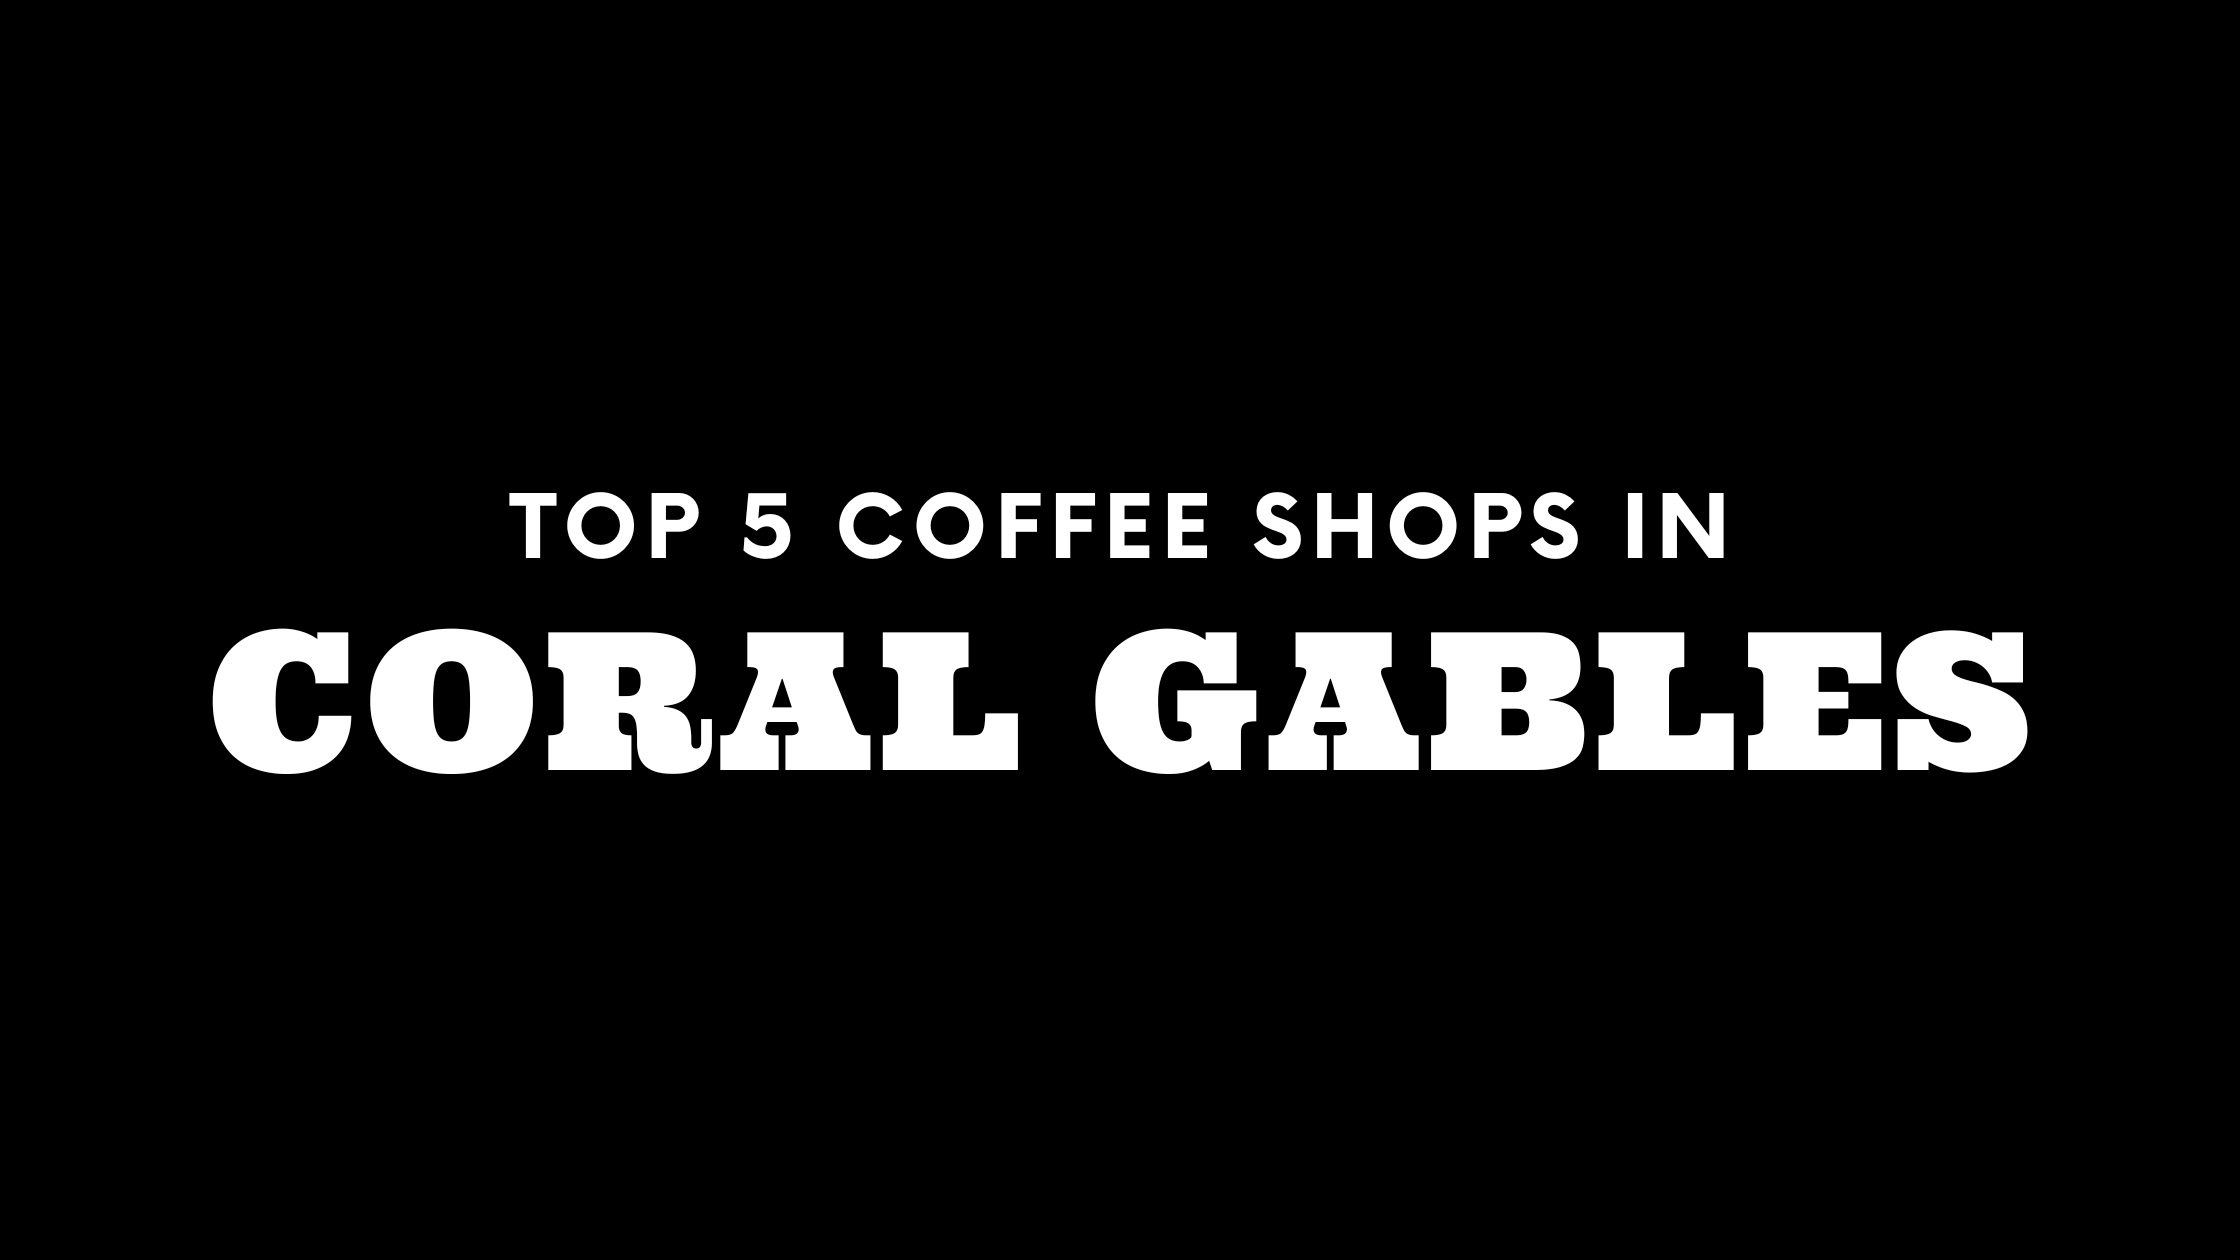 Top 5 Coffee Shops in Coral Gables